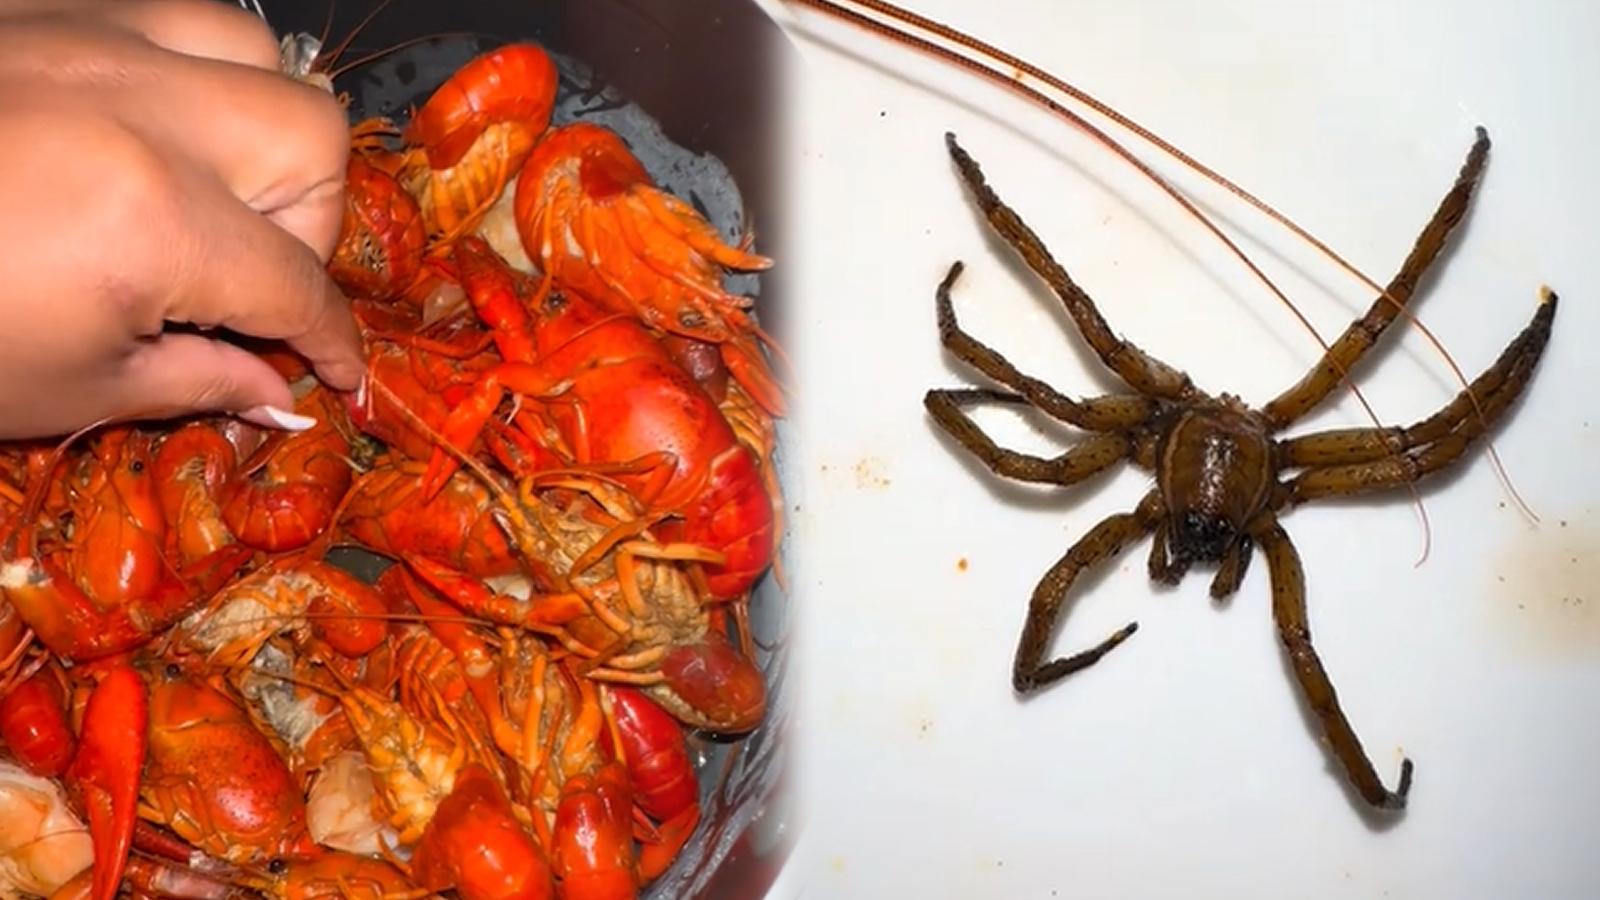 Woman refused refund after discovering spiders in her seafood order